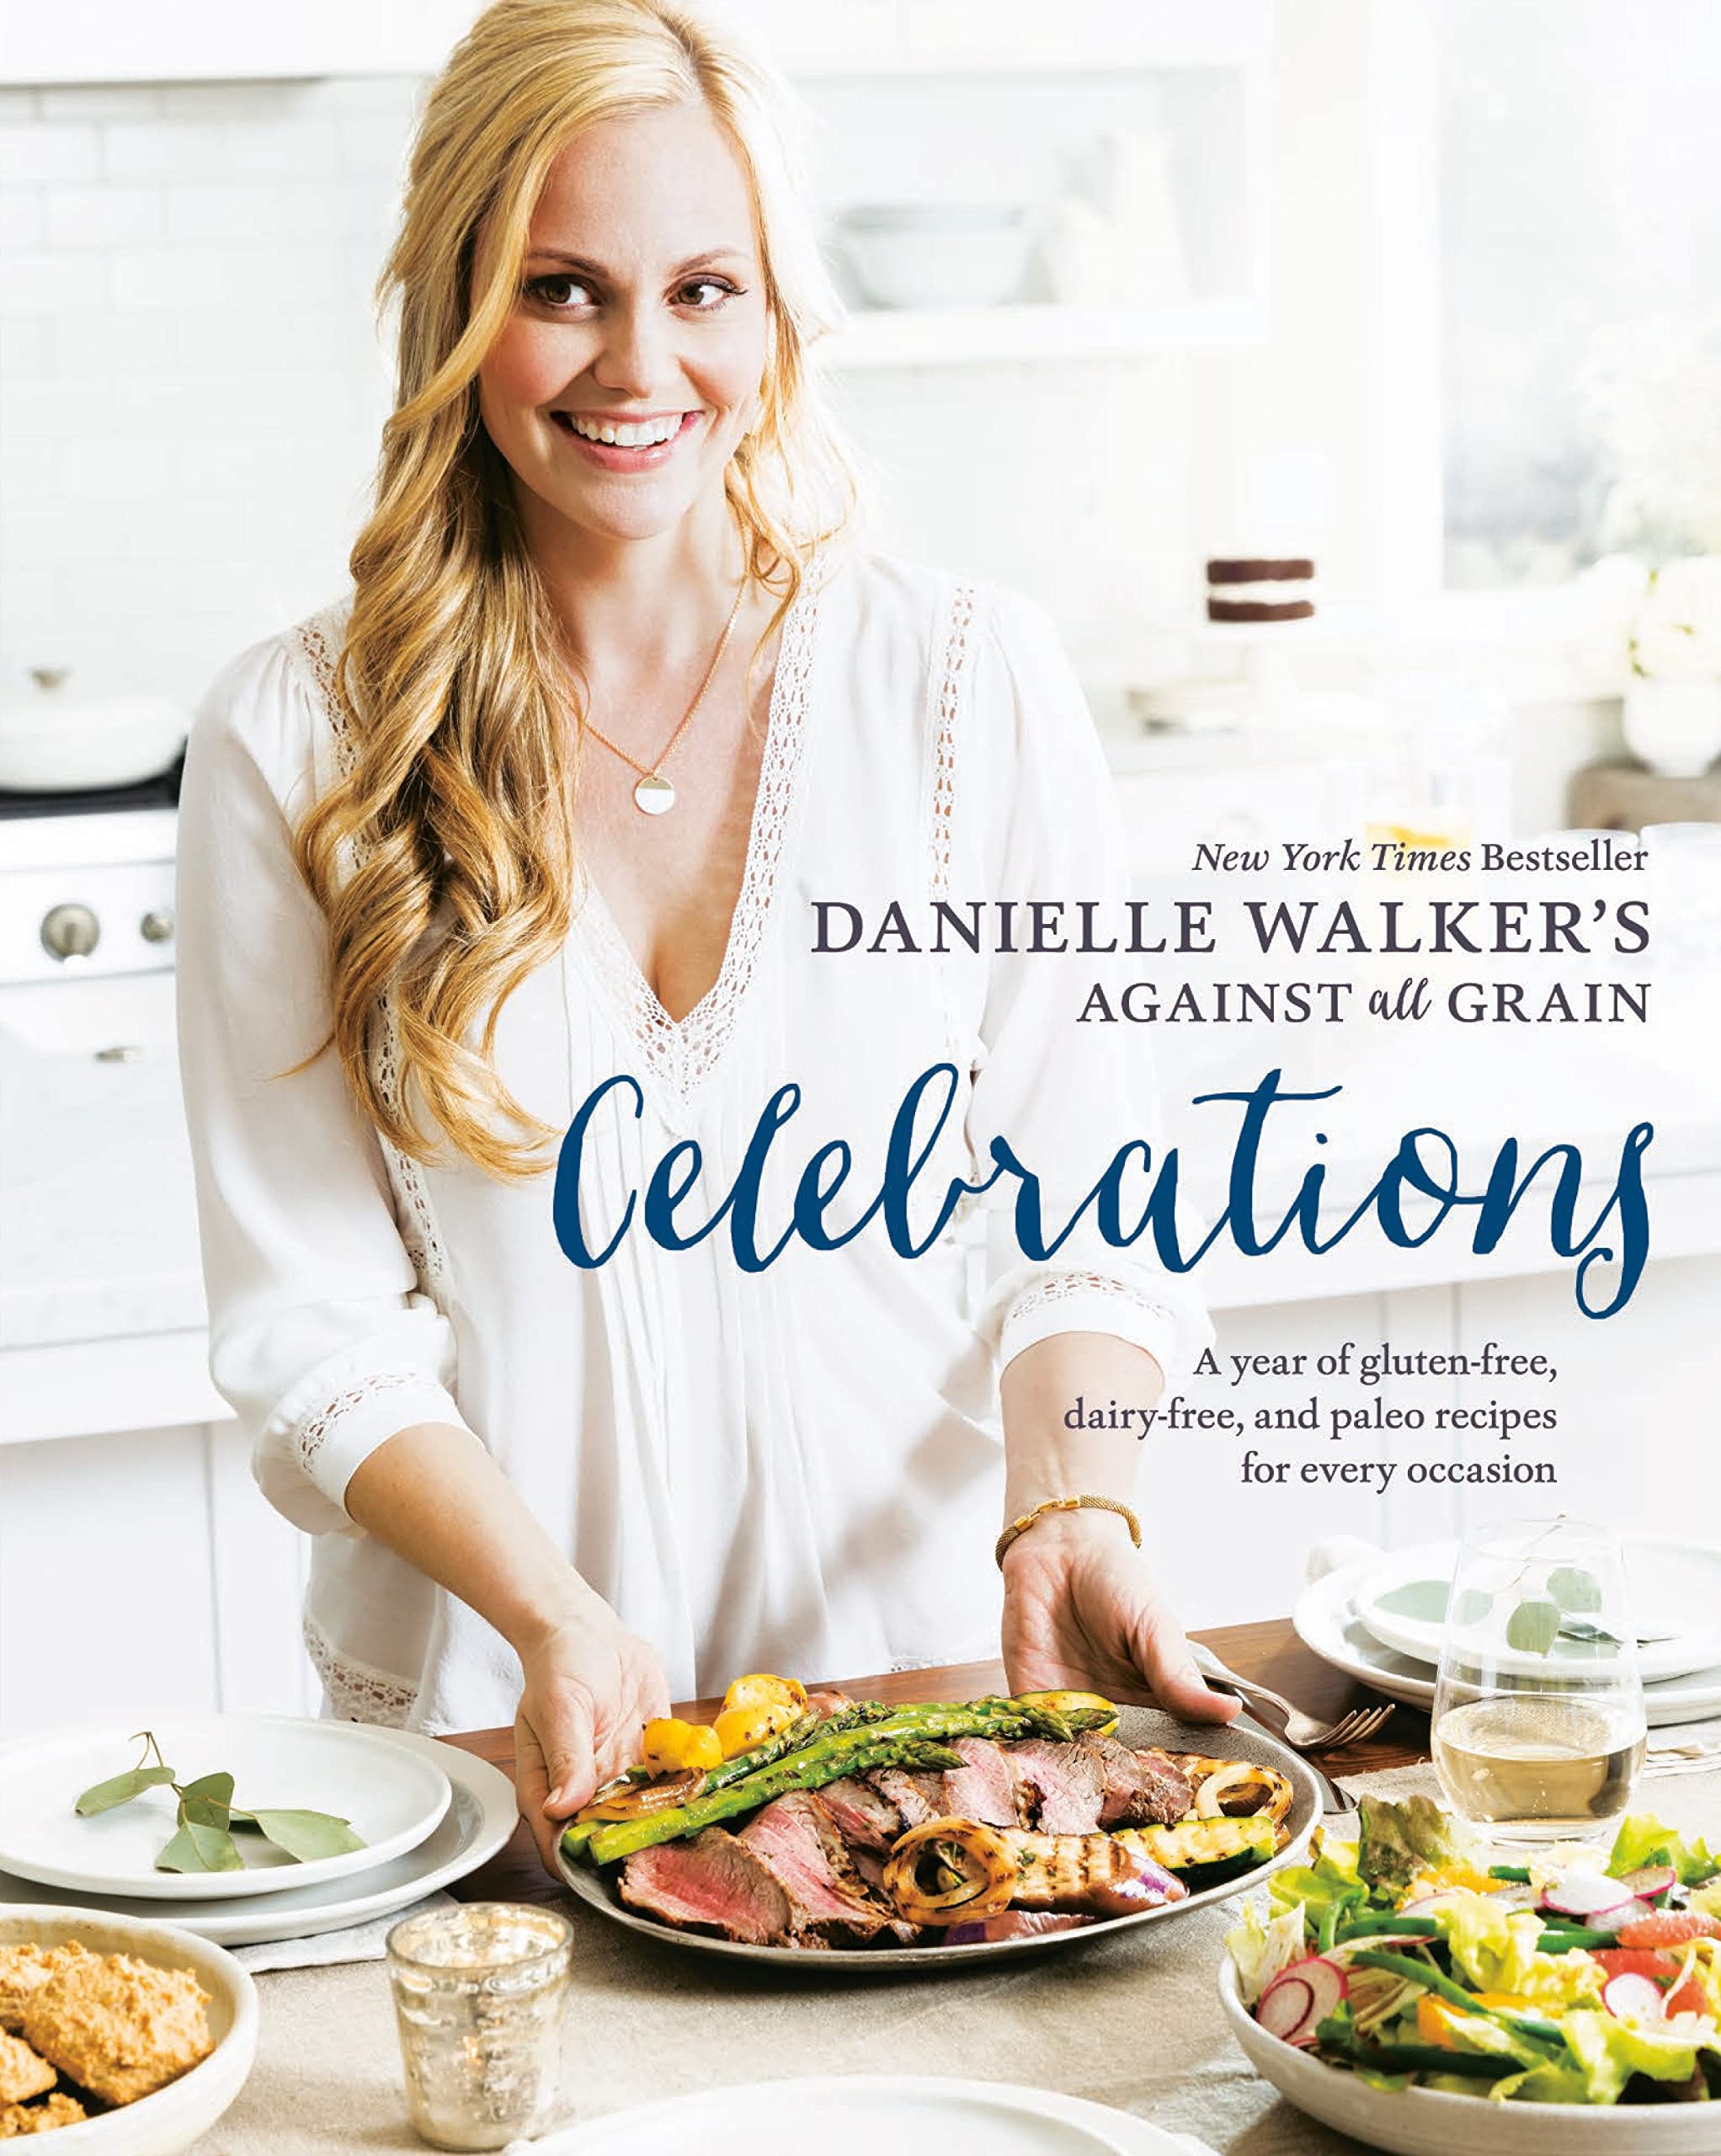 Danielle Walker's Against All Grain Celebrations: A Year of Gluten-Free<!-- @ 15 @ --> Dairy-Free<!-- @ 15 @ --> and Paleo Recipes for Every Occasion [A Cookbook]